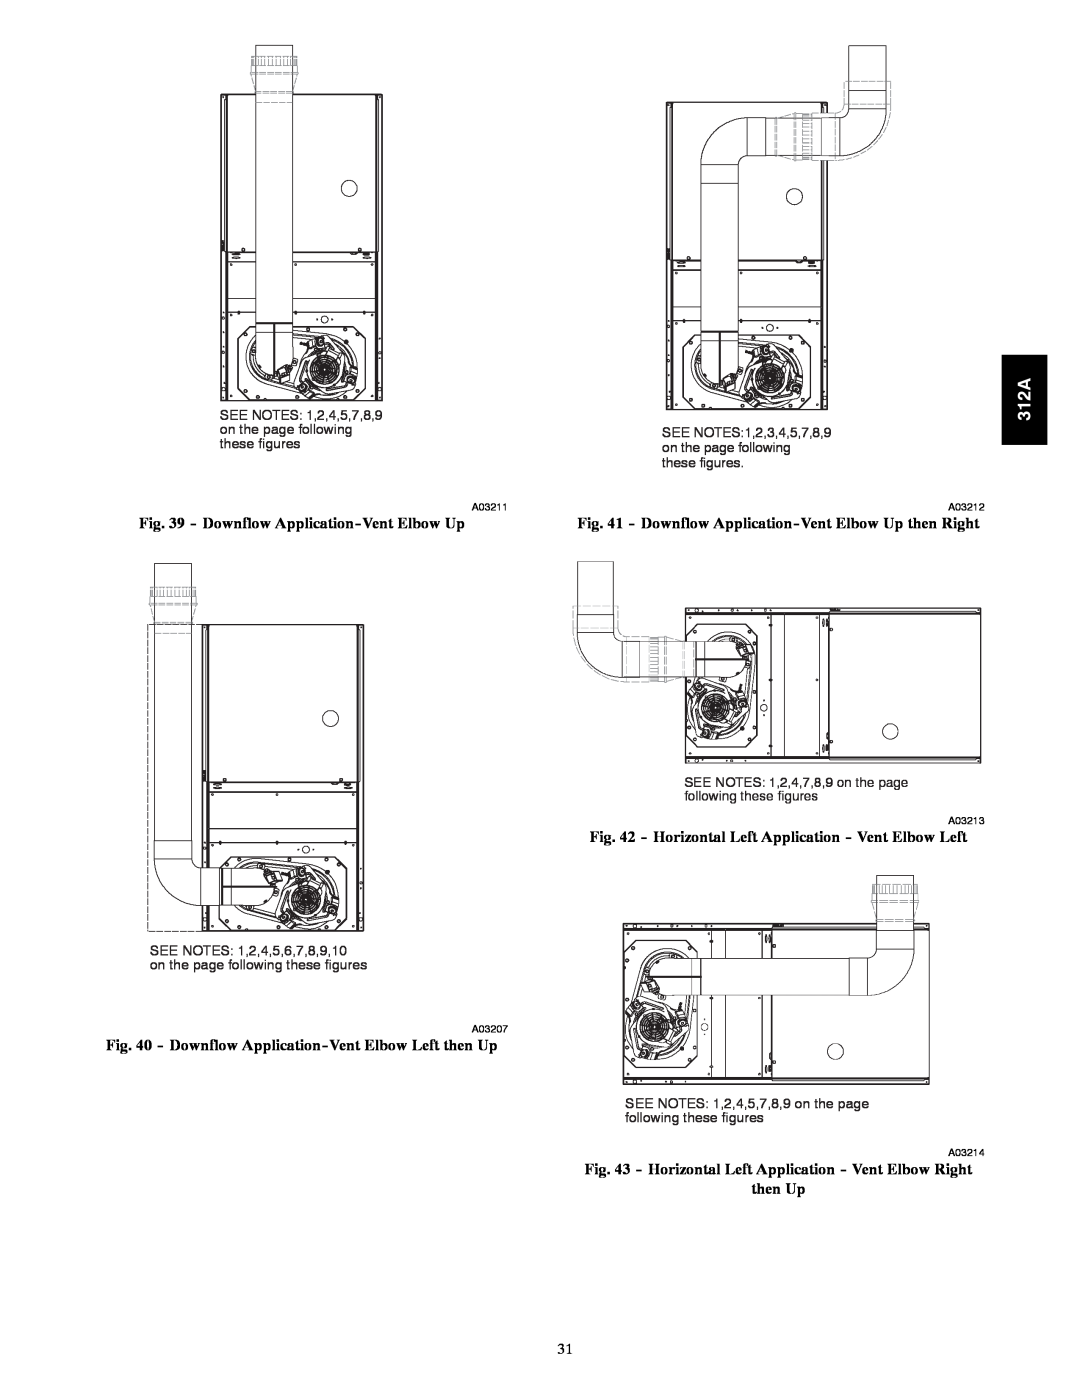 Bryant 120 instruction manual Downflow Application-VentElbow Up, then Up, 312A 